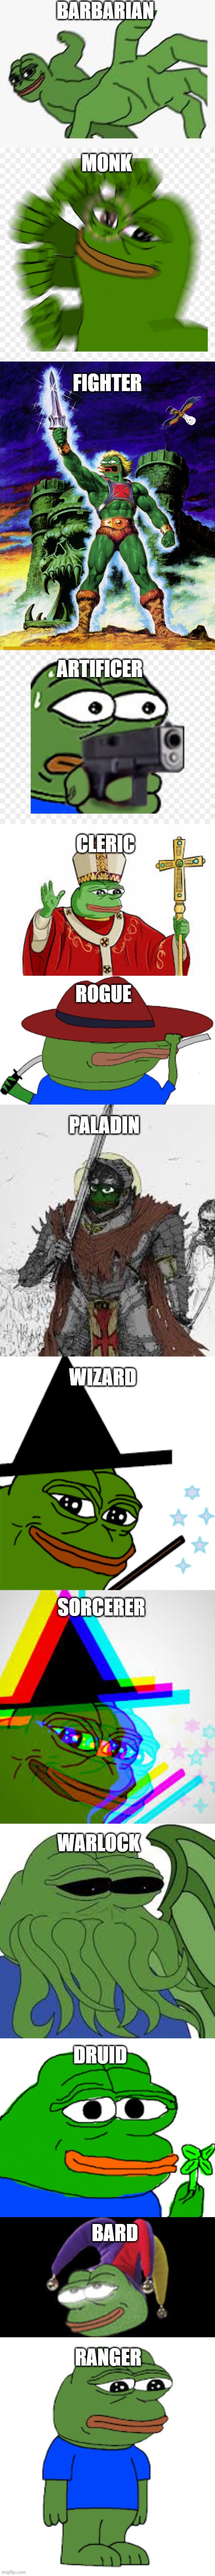 The classes of Pe & Pe | BARBARIAN; MONK; FIGHTER; ARTIFICER; CLERIC; ROGUE; PALADIN; WIZARD; SORCERER; WARLOCK; DRUID; BARD; RANGER | image tagged in pepe the frog,dnd,dungeons and dragons,pepe | made w/ Imgflip meme maker